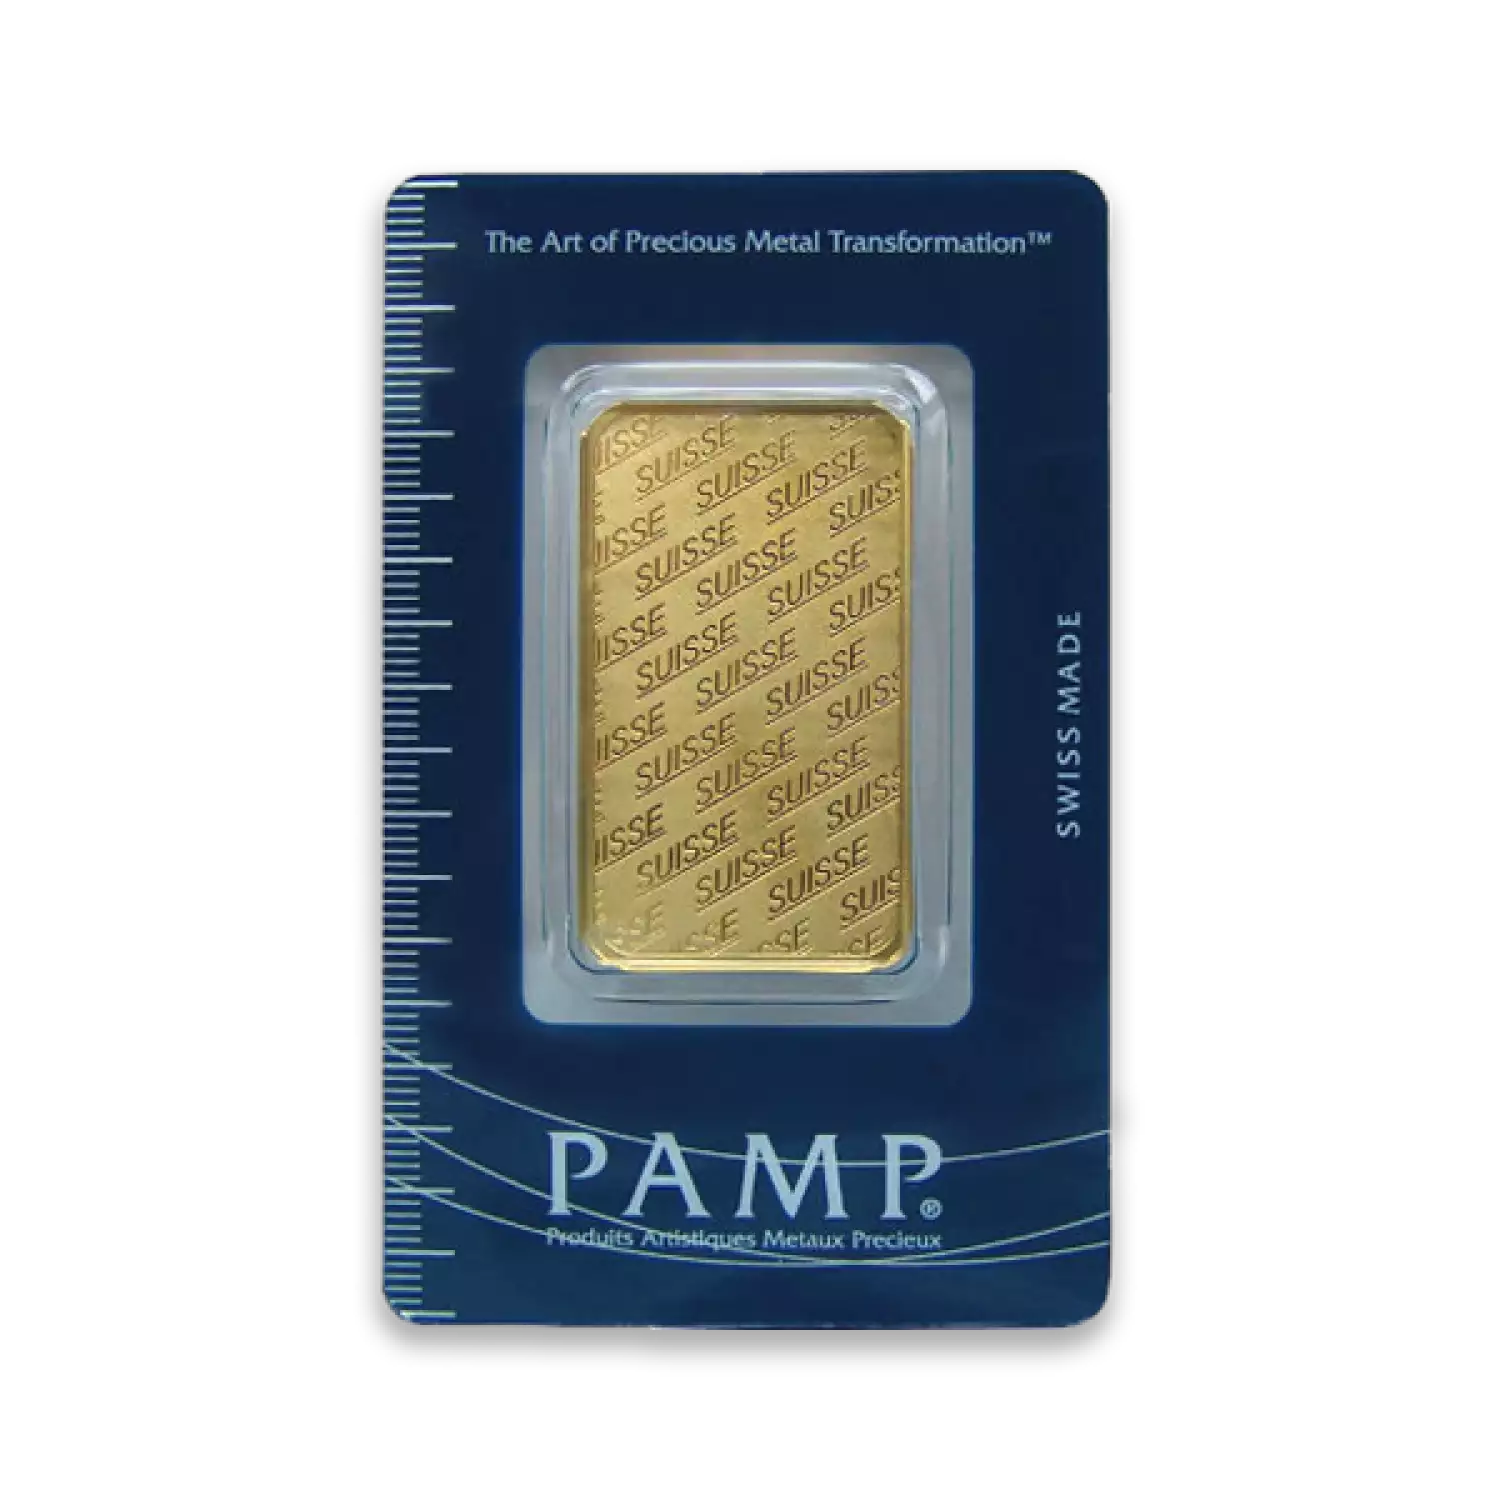 1oz PAMP Gold Bar - Suisse Repeater (2)